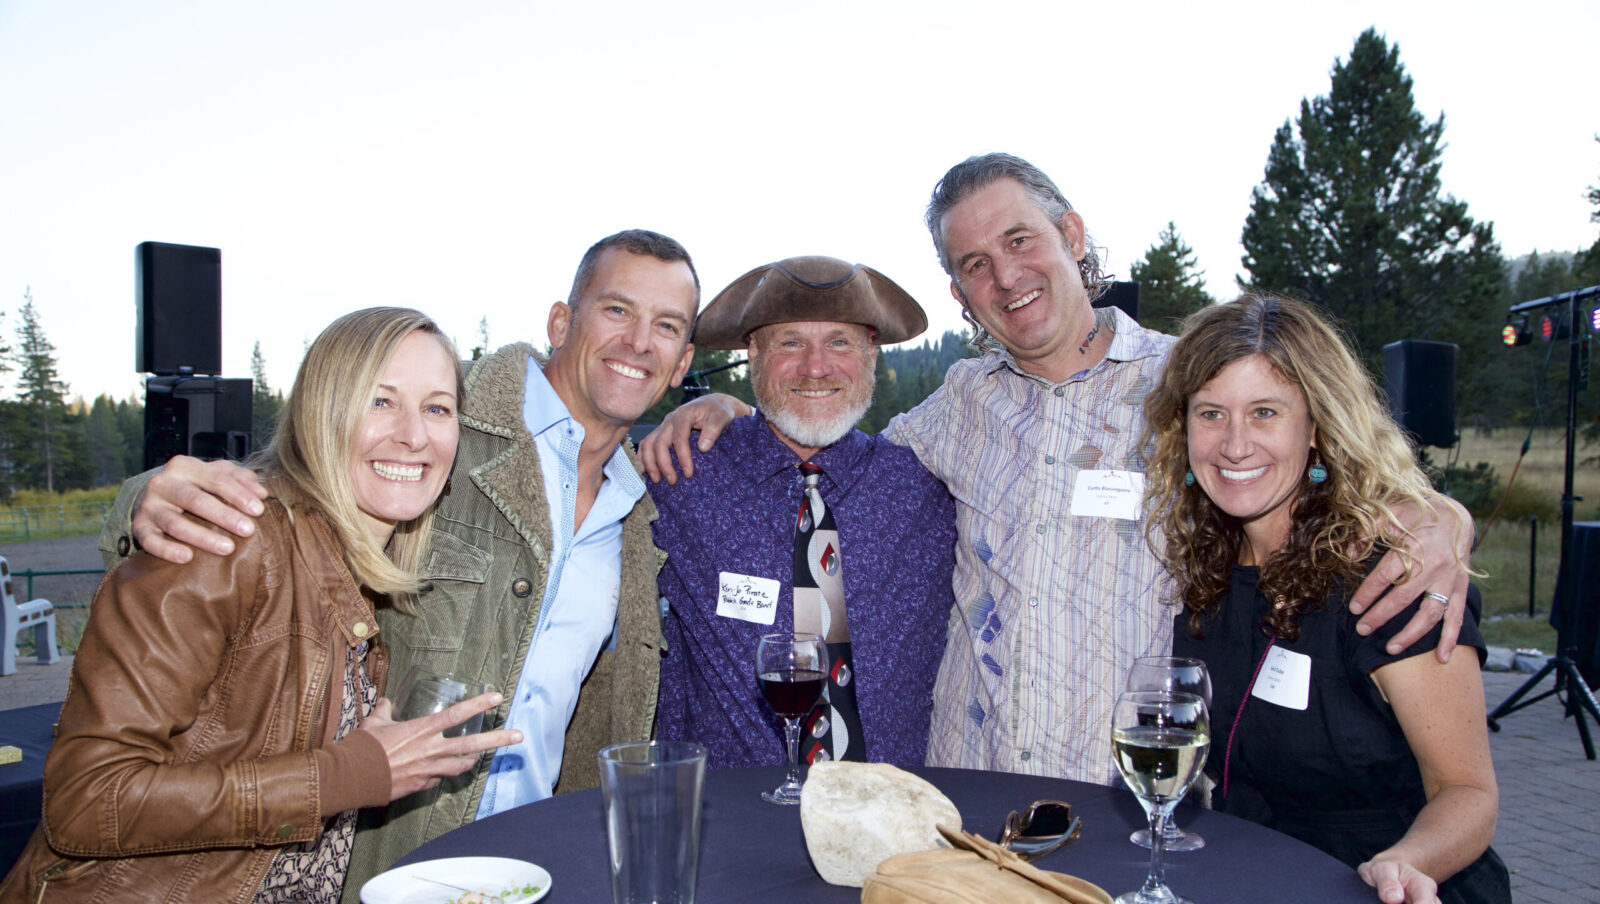 Top of the Town - Truckee Chamber's 70th Annual Awards Celebration Photos Are In!